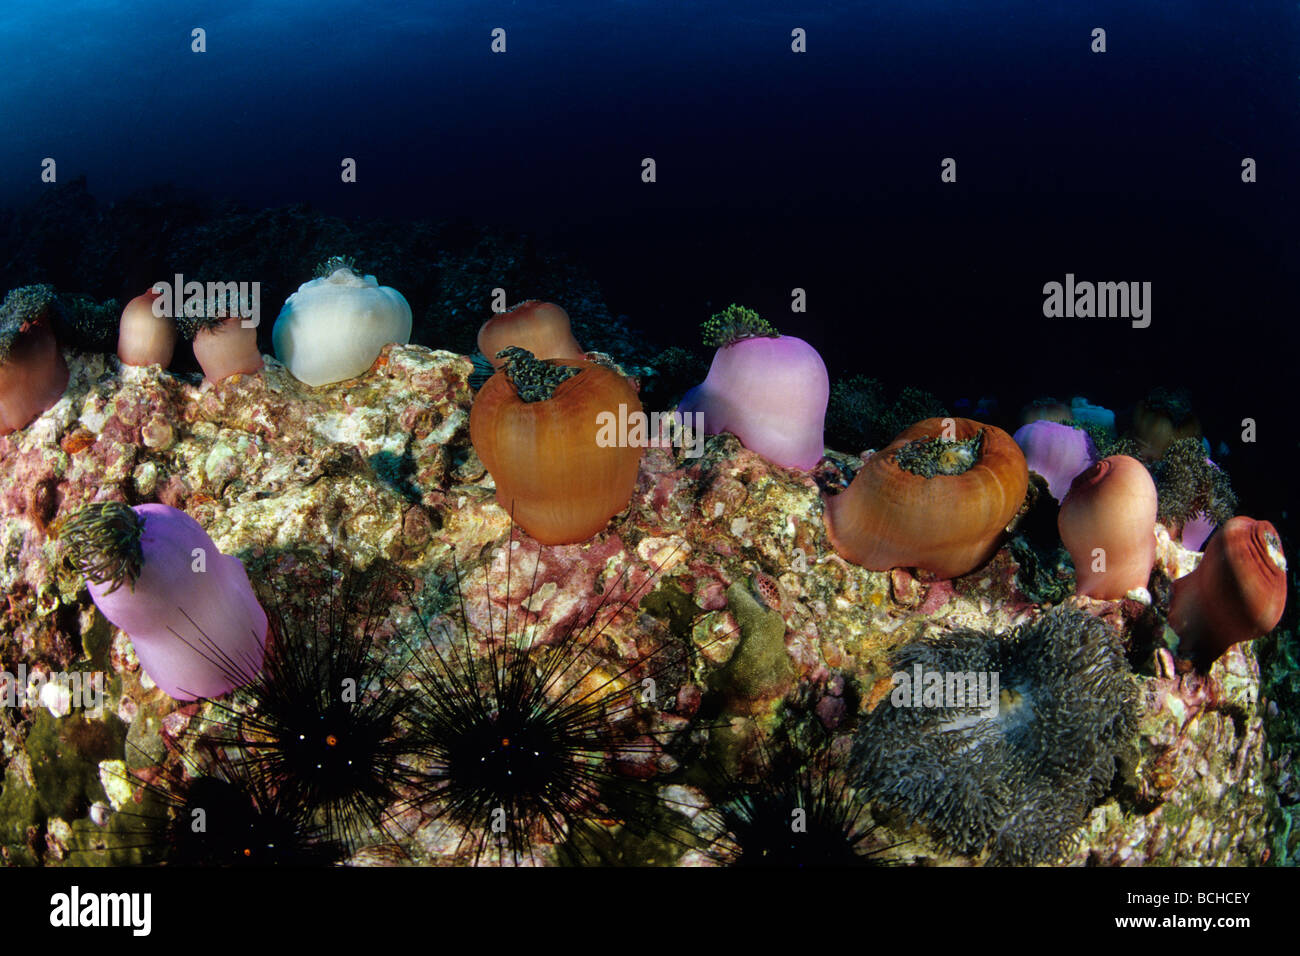 Stretch of Magnificent Anemone Heteractis magnifica Similan Islands Andaman Sea Thailand Stock Photo